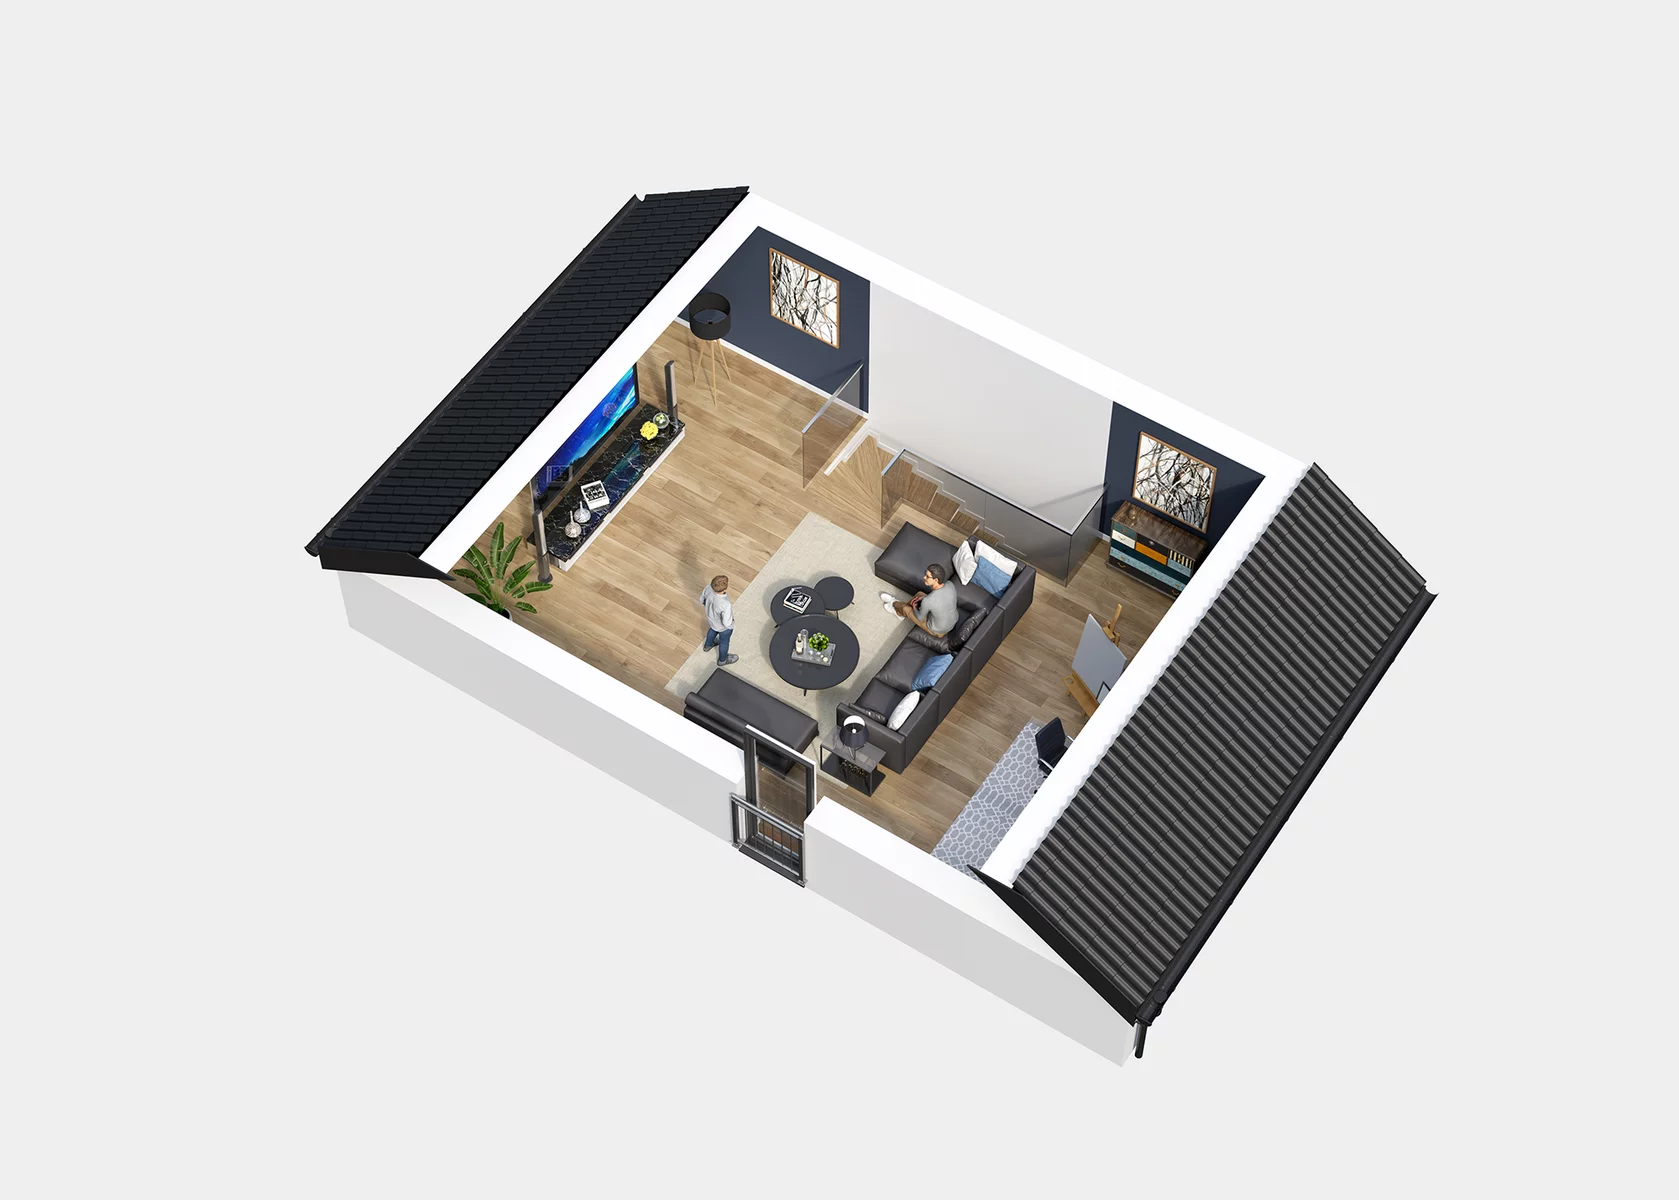 Visualization of the attic floor in the house MODERN FAMILY 145 in the German city of Halle